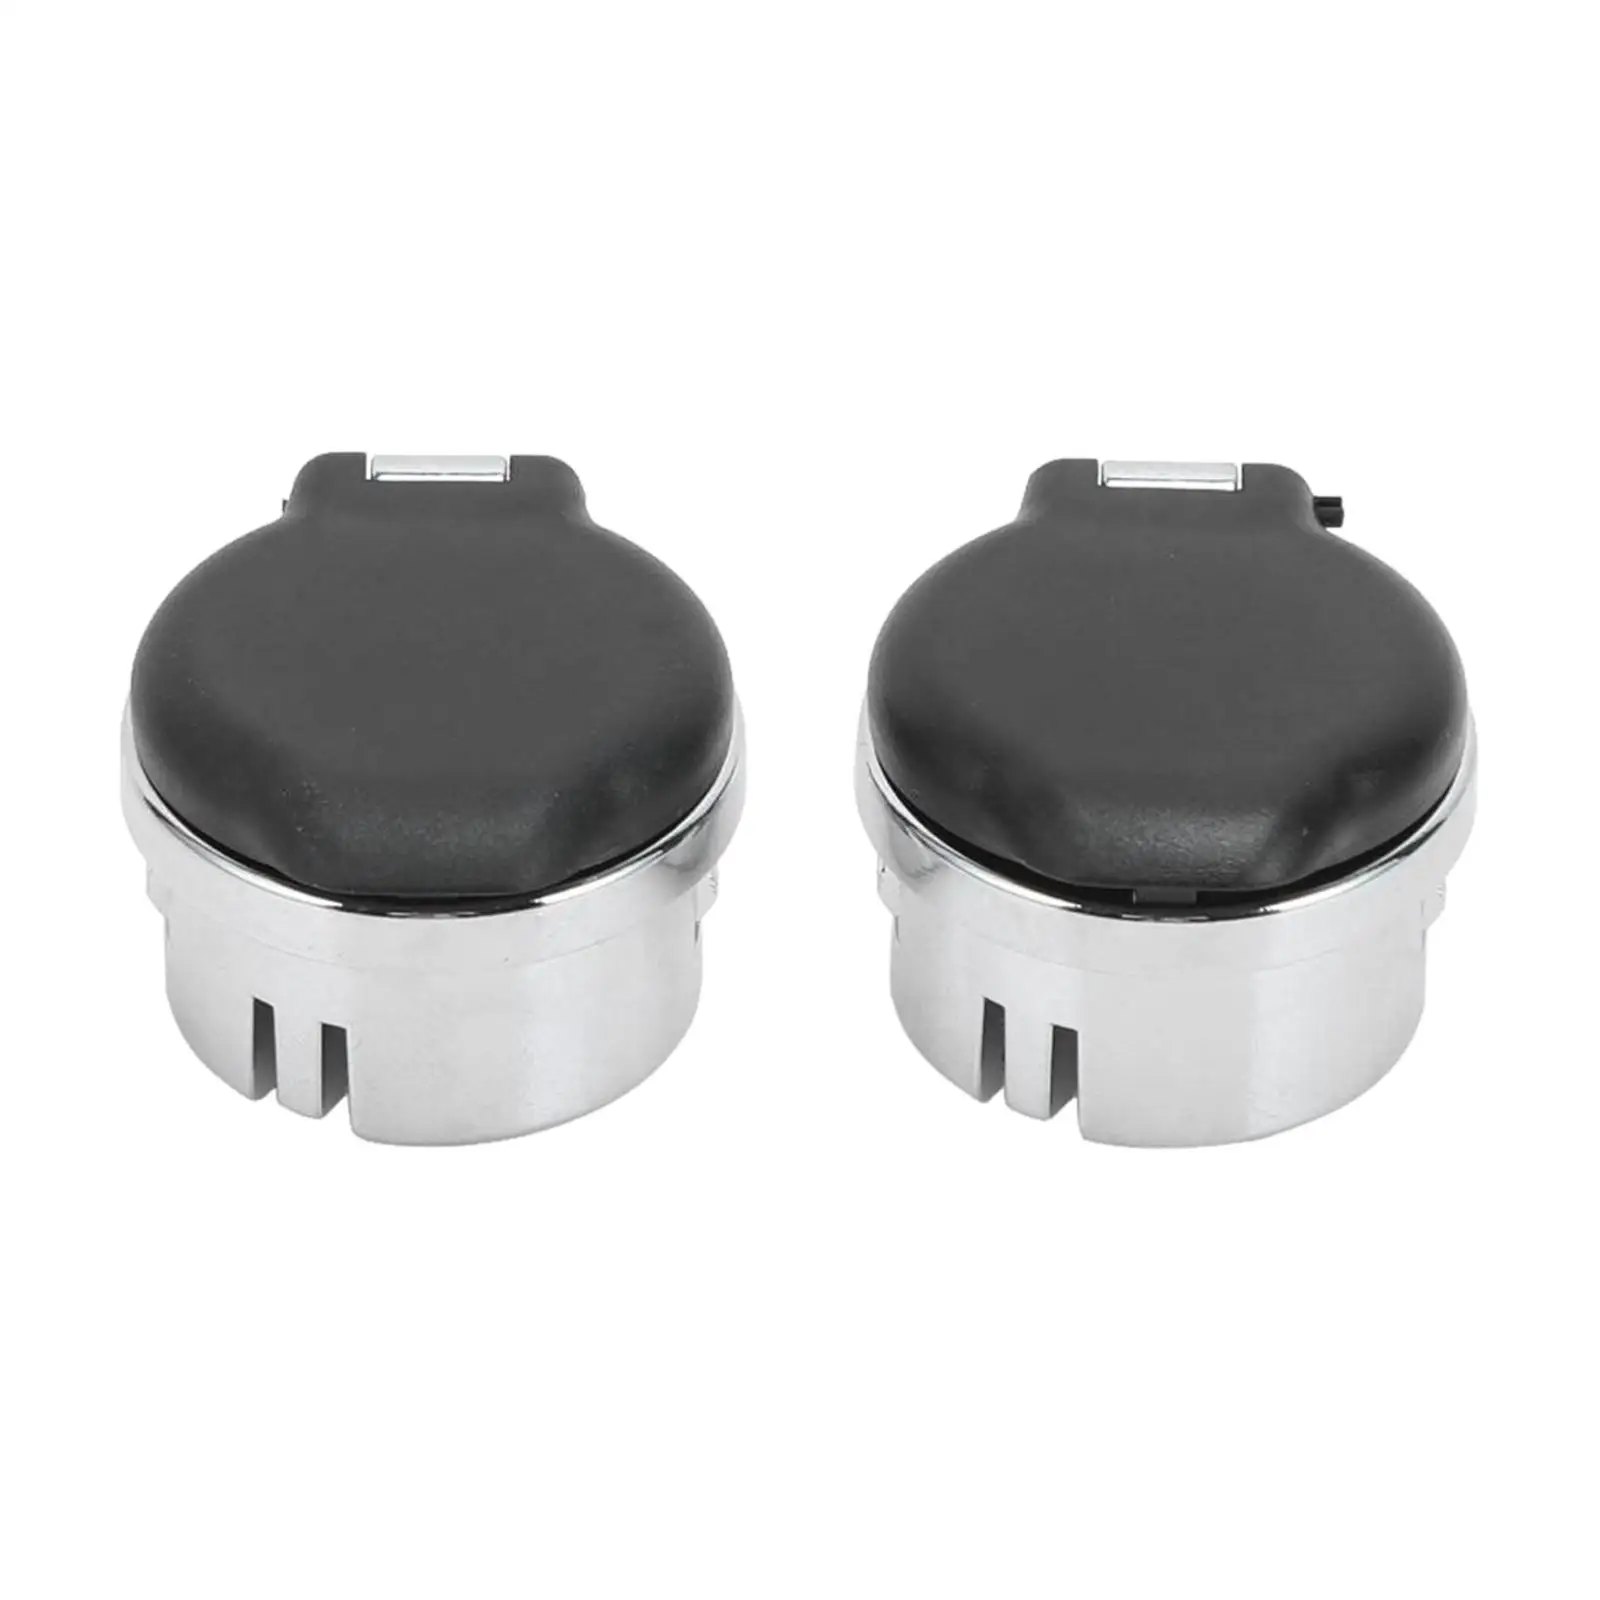 2 Pieces Car Power Outlet Covers 20983936 Plug Cover Replacement for Chevrolet Sierra Tahoe Easy Installation Replace Parts